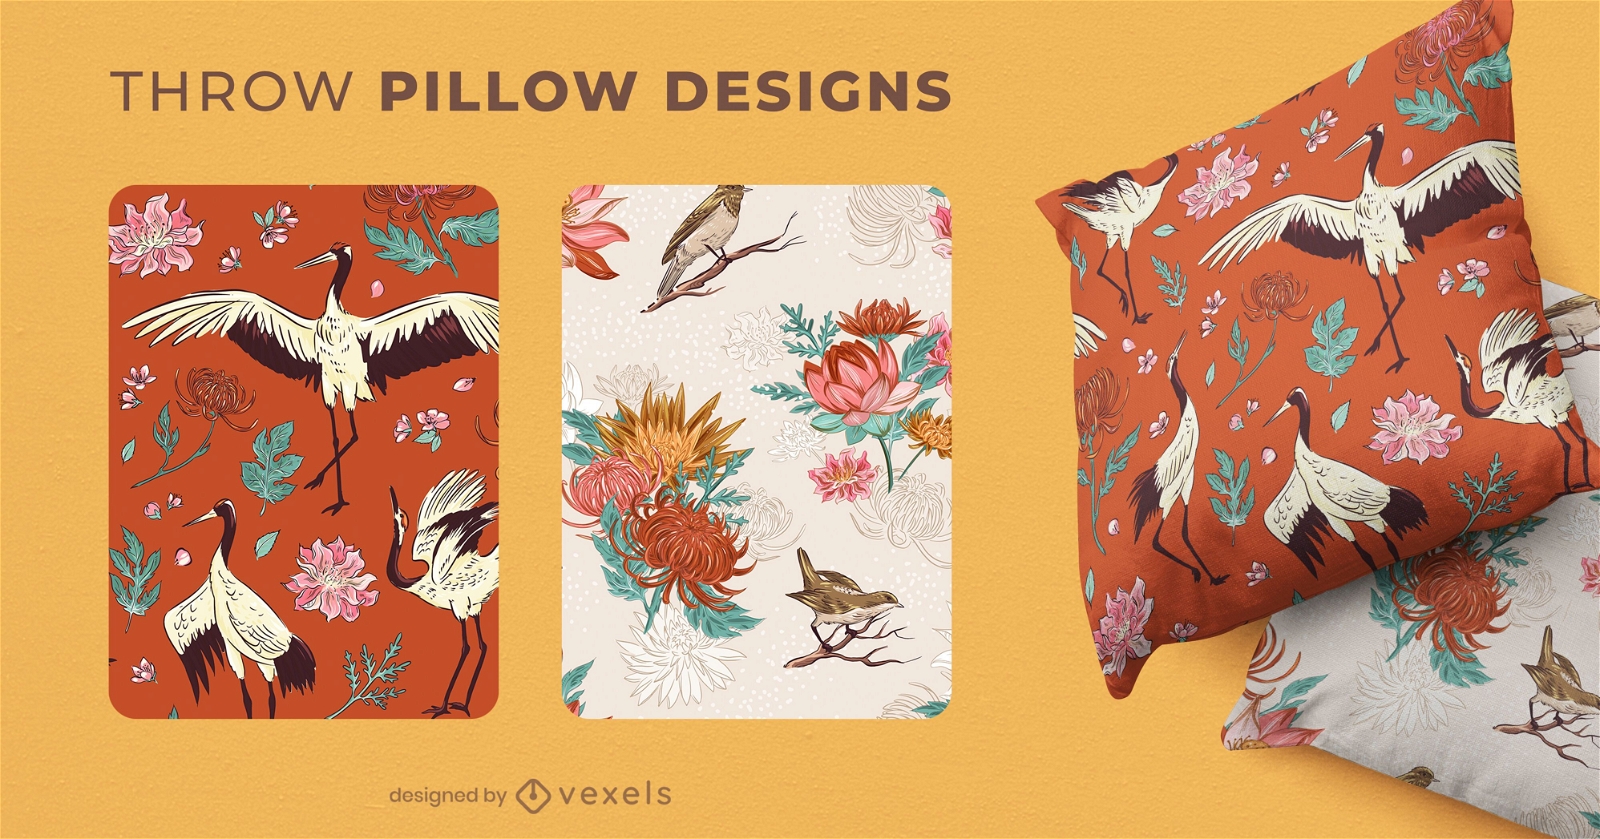 Chinese nature throw pillow designs